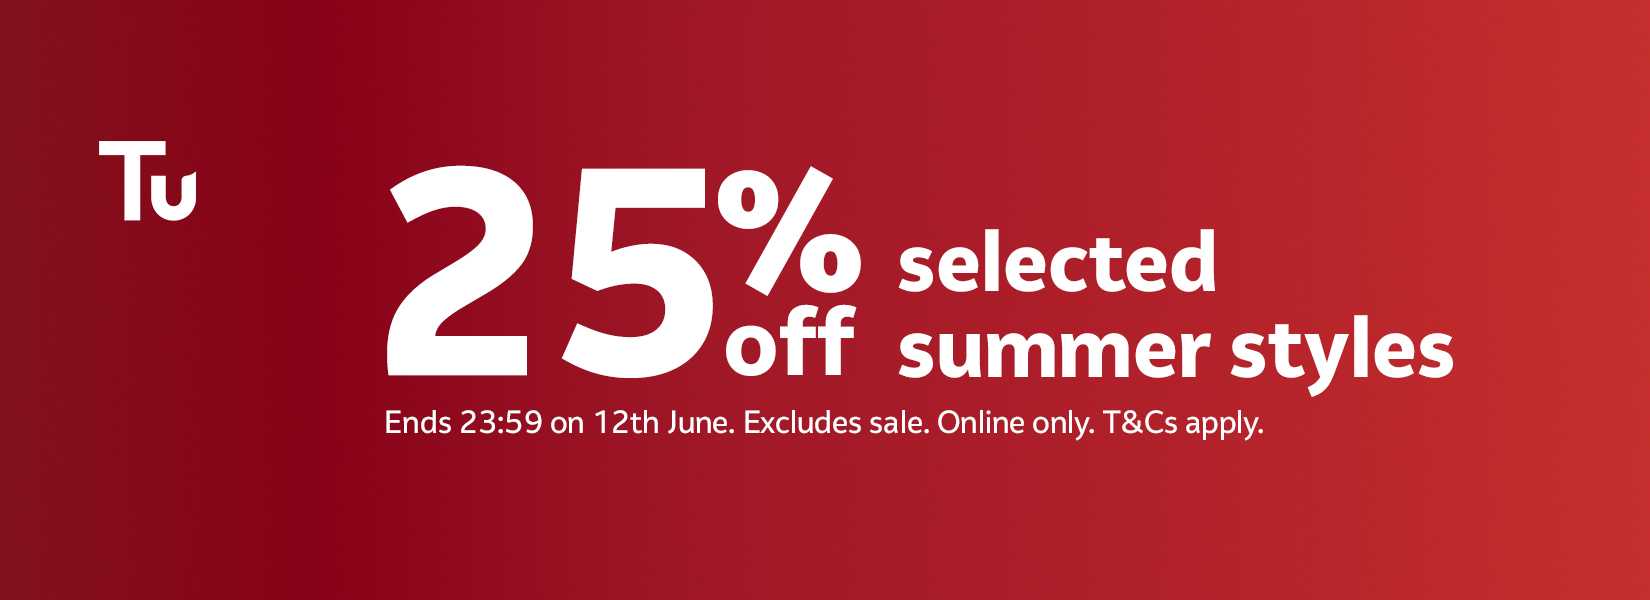 25% off selected summer styles. Ends 23:59 on 12 June. Excludes sale. Online only. T&Cs apply.